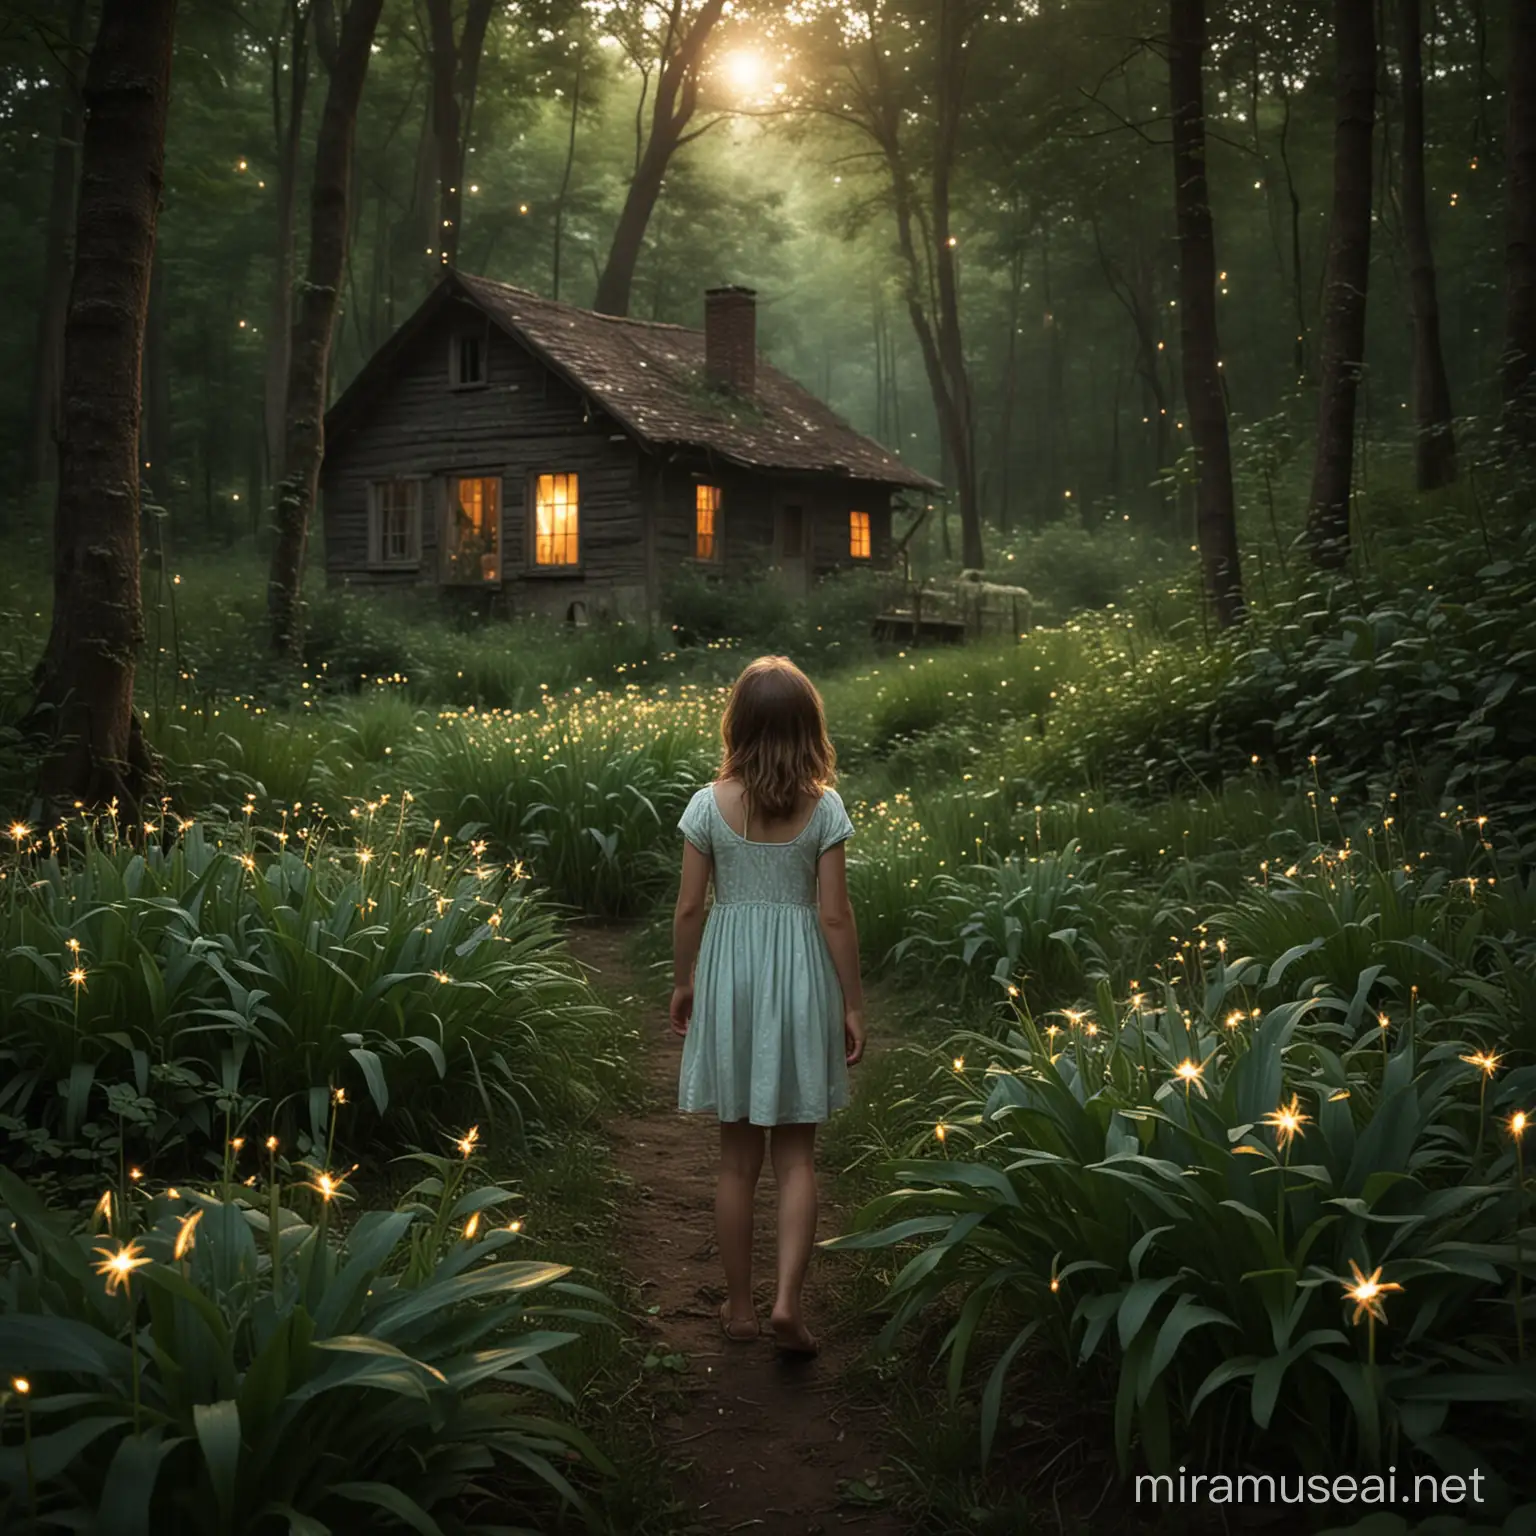 Enchanting Discovery Lilys Encounter with Fireflies in a Hidden Glade